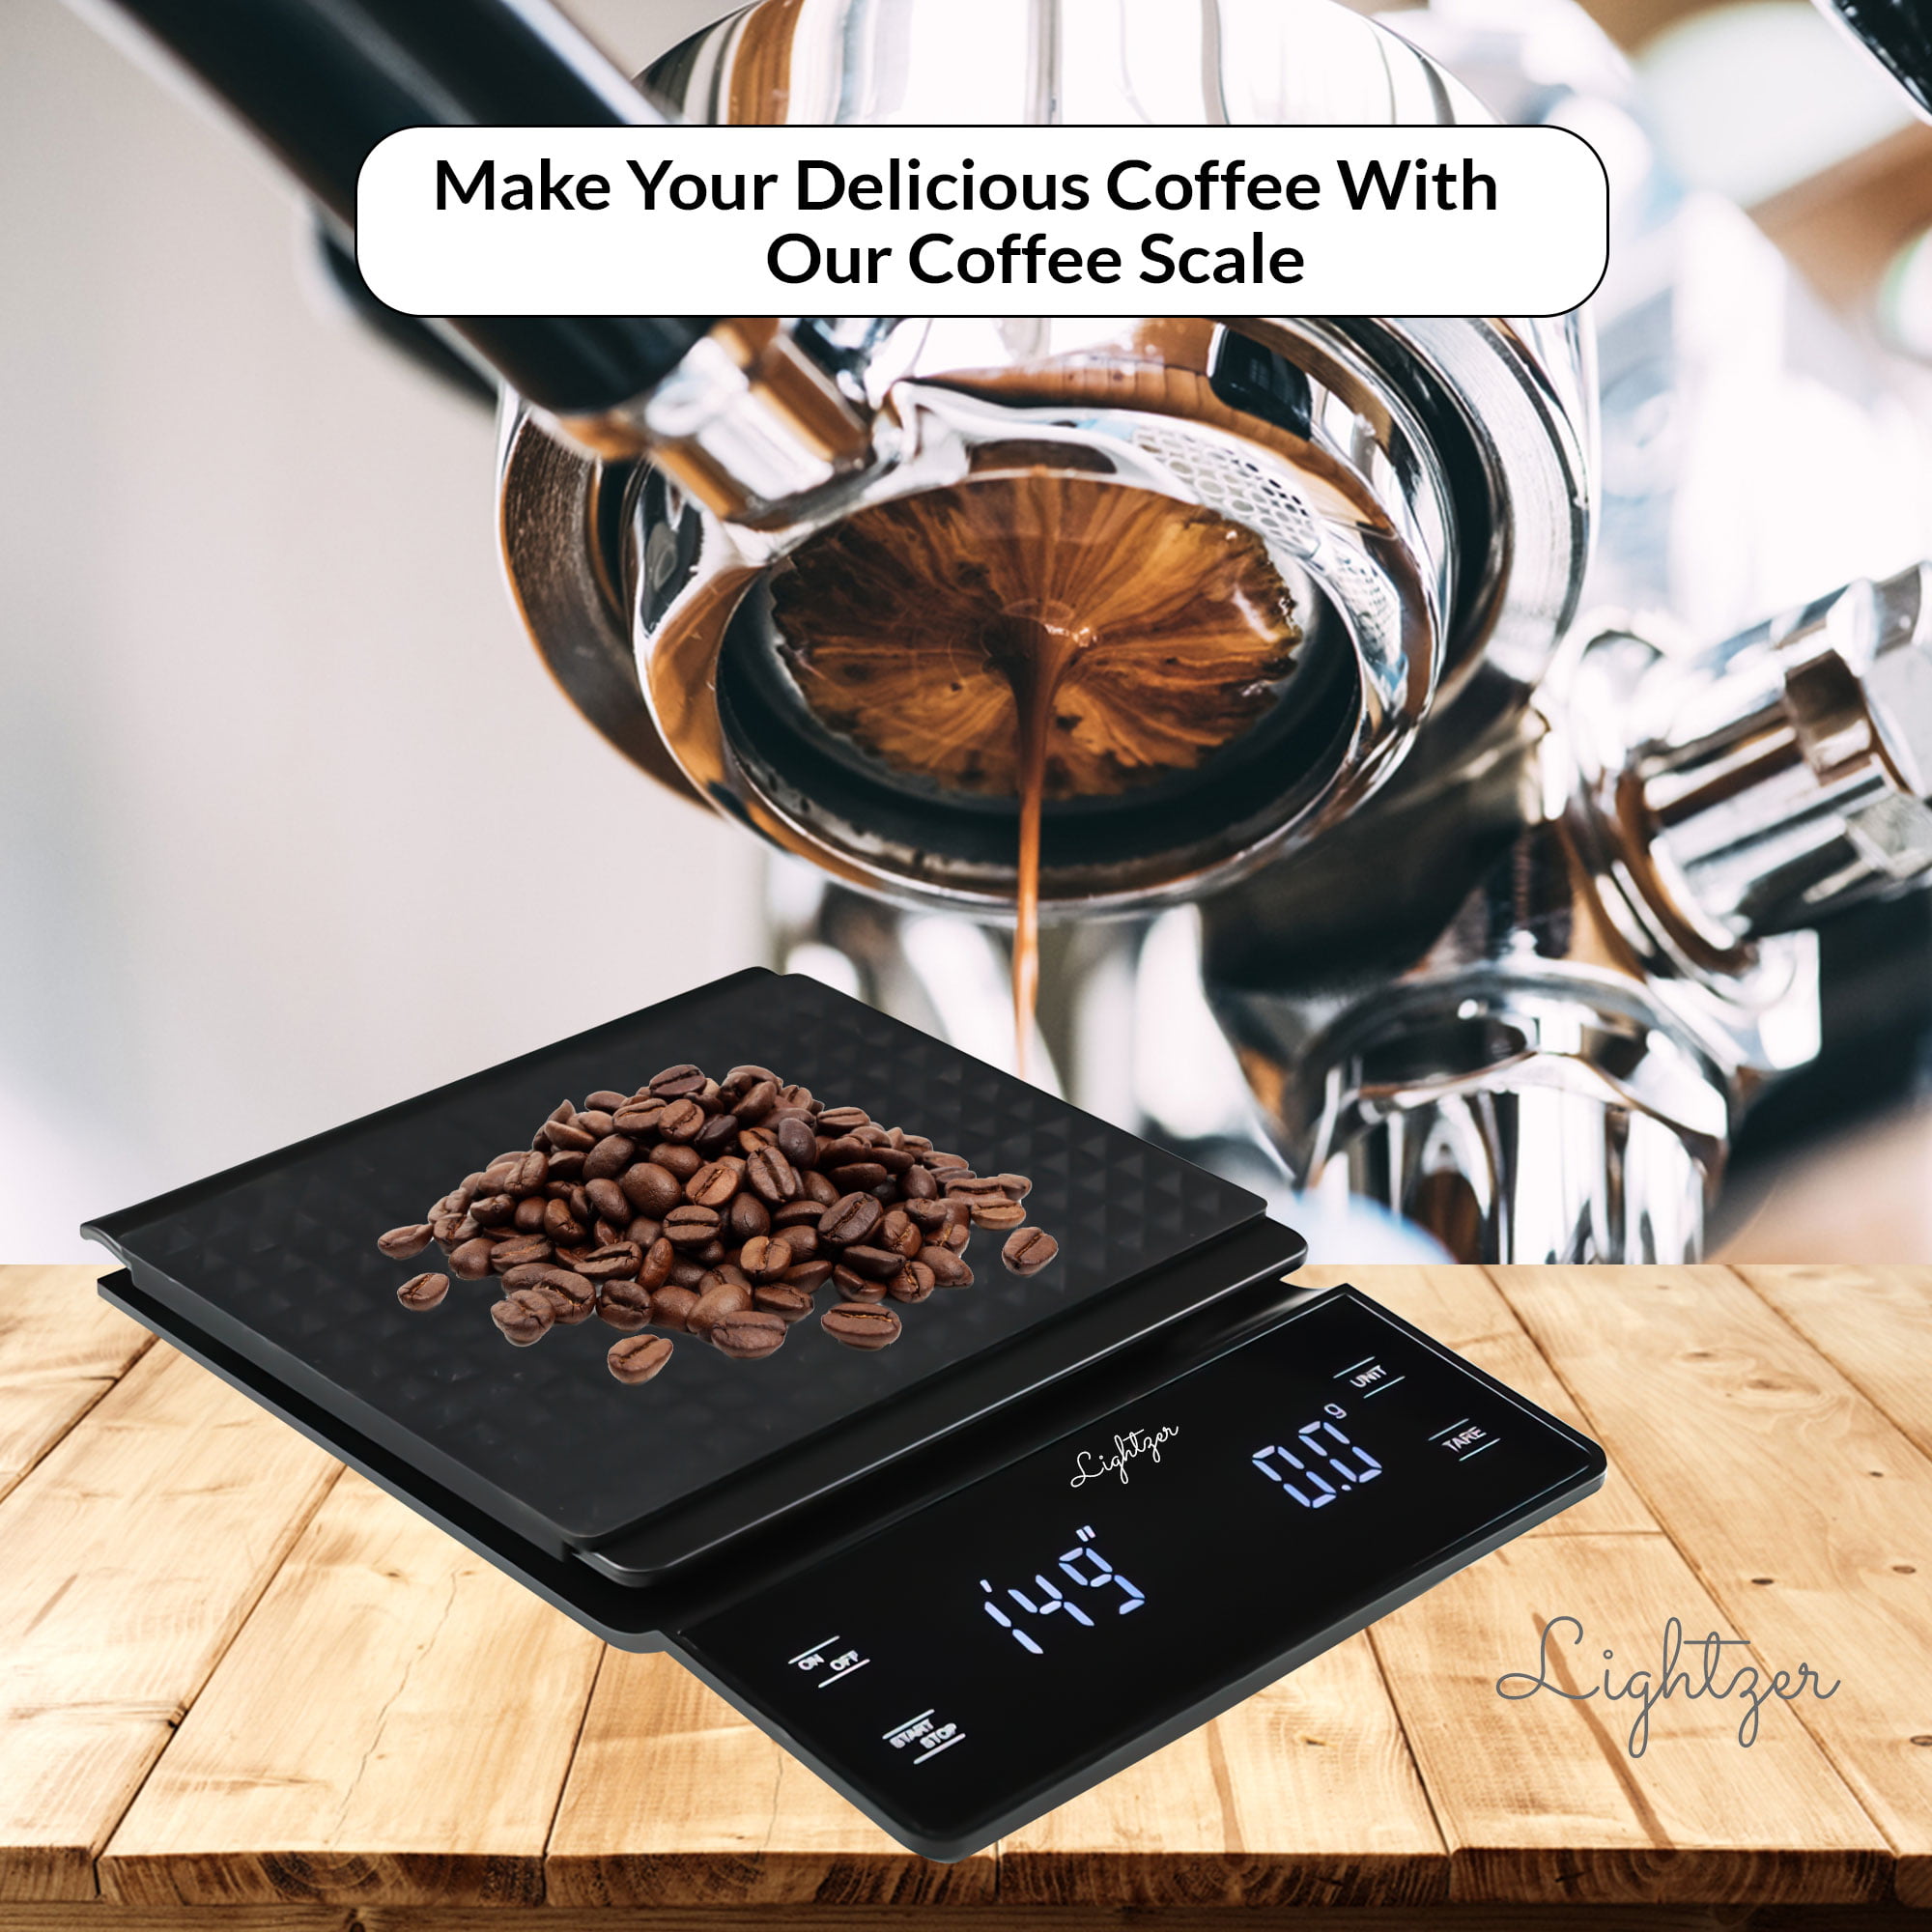 Elitra Home Round Digital Coffee Scale with Built-In Timer, Black 